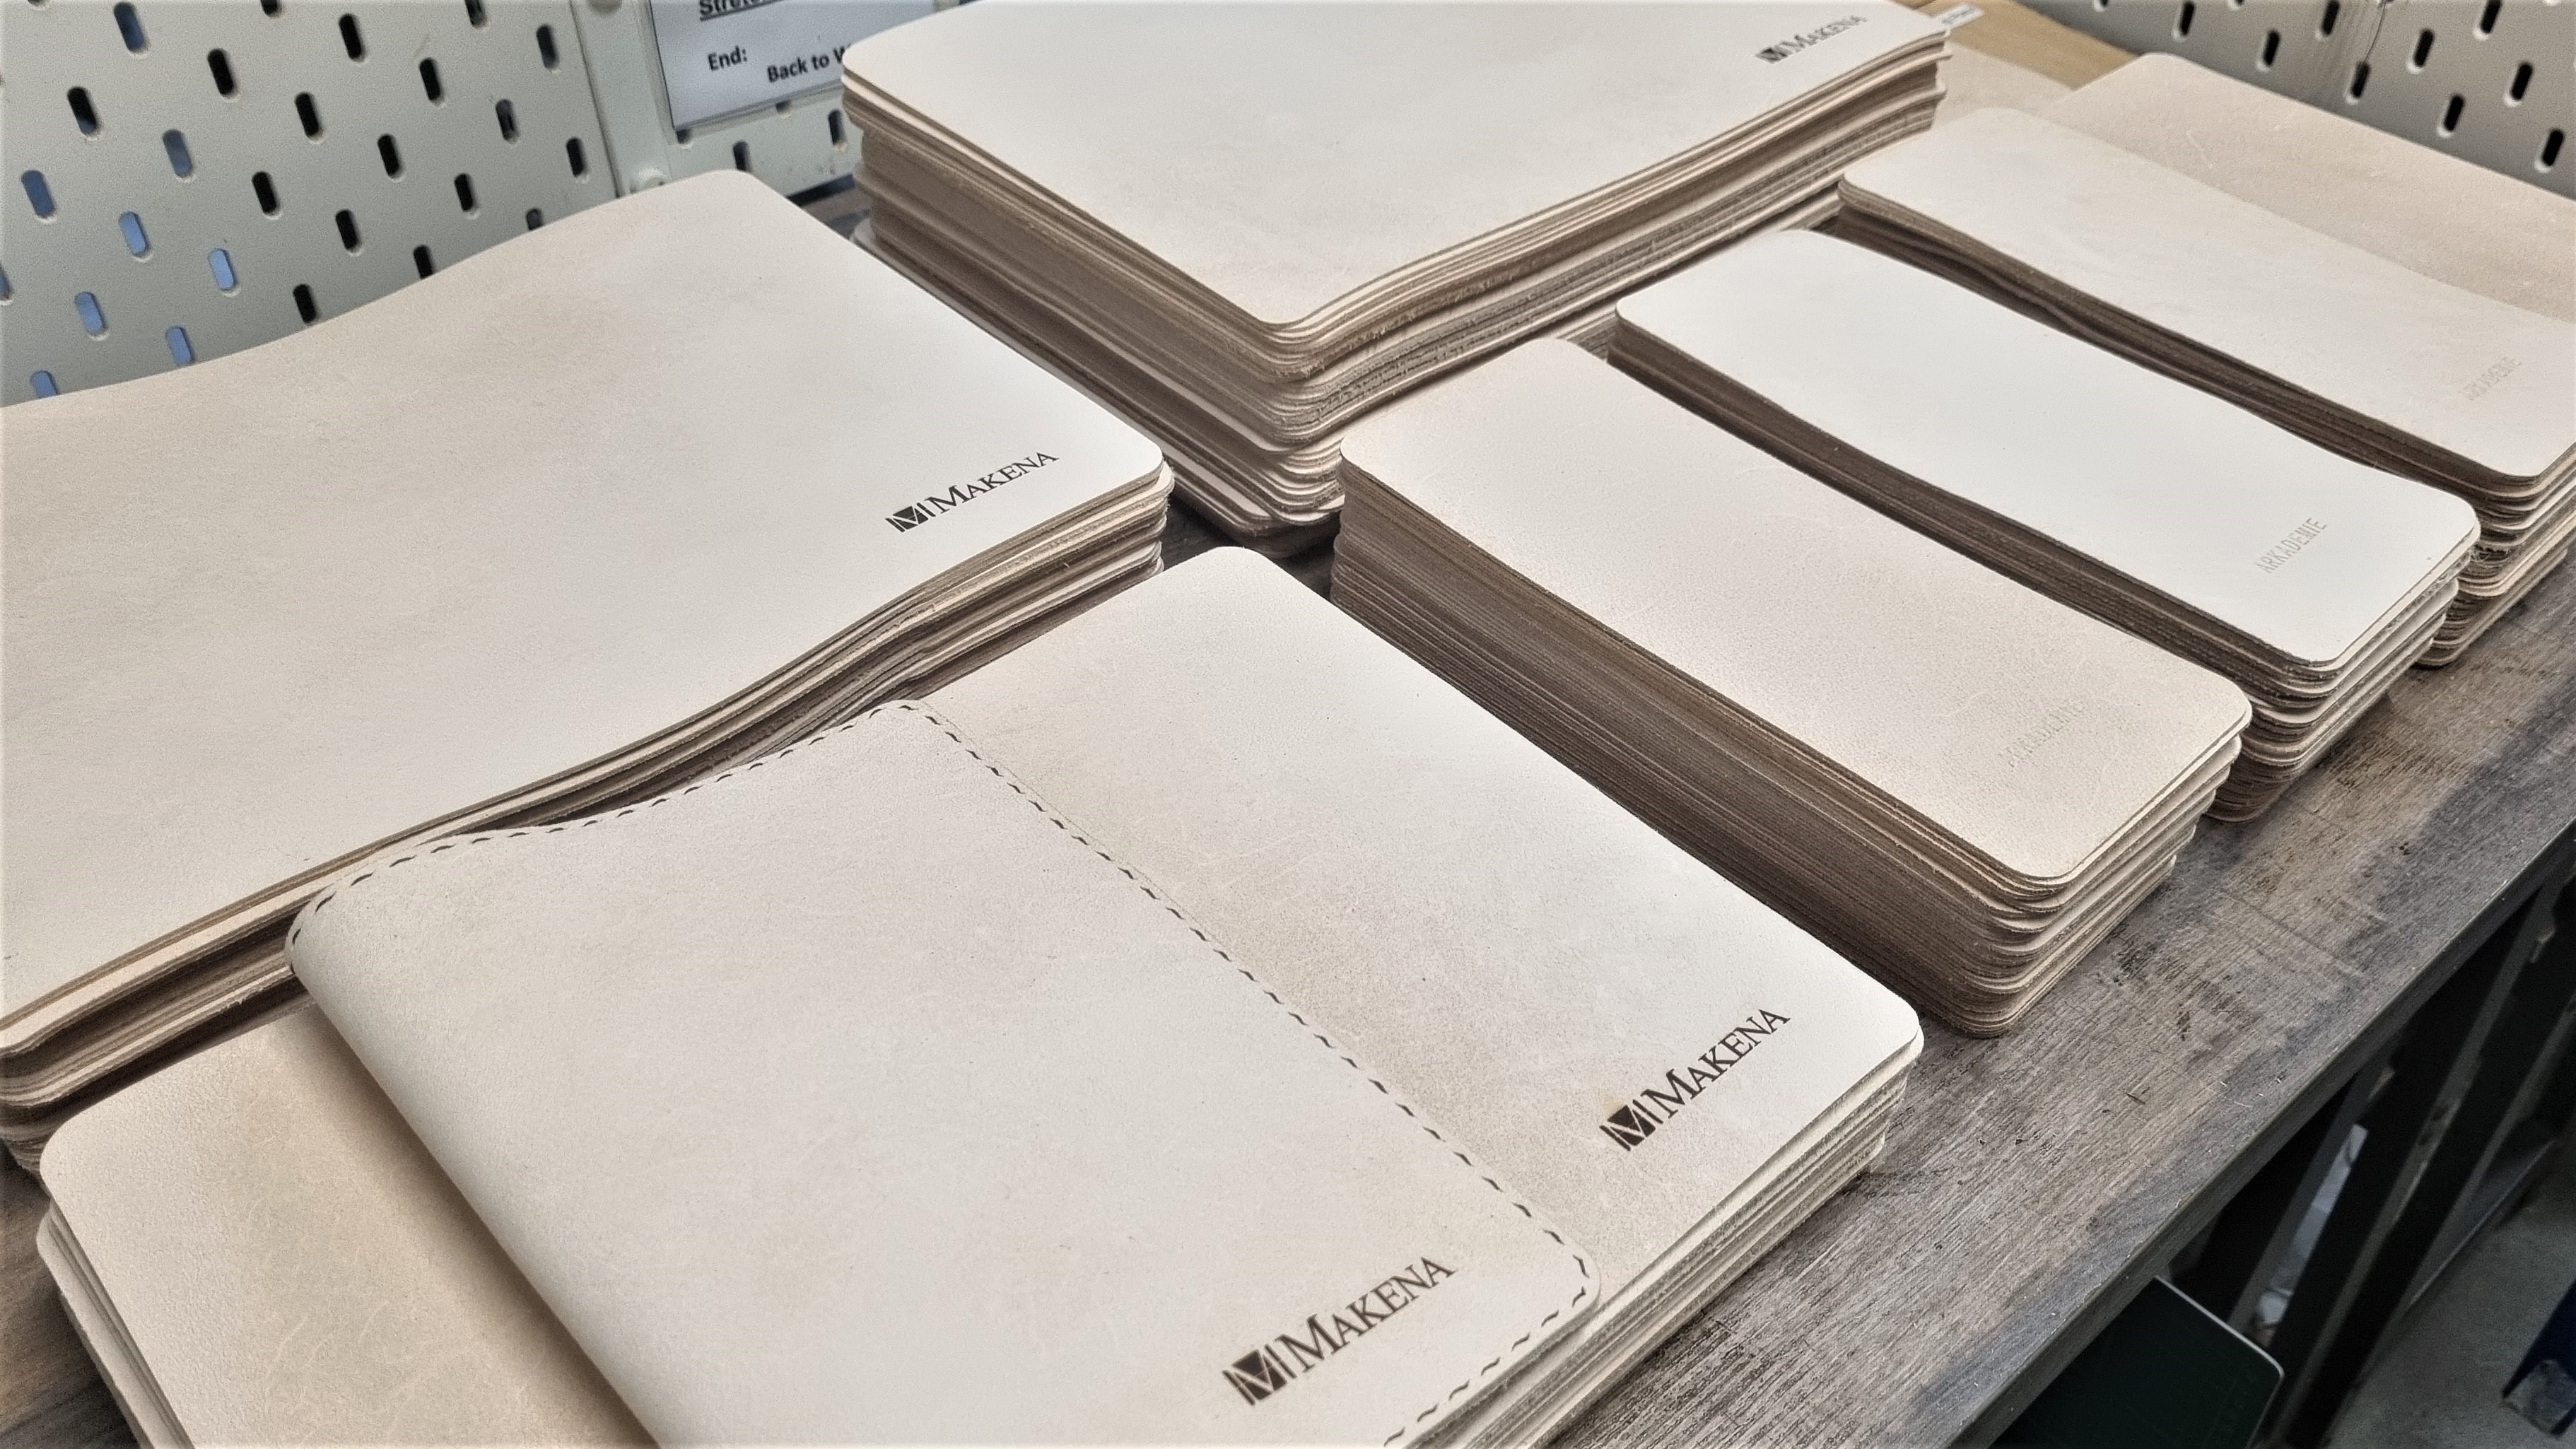 Leather book sleeves with the Makena logo embedded at the bottom right corner of each sleeve.